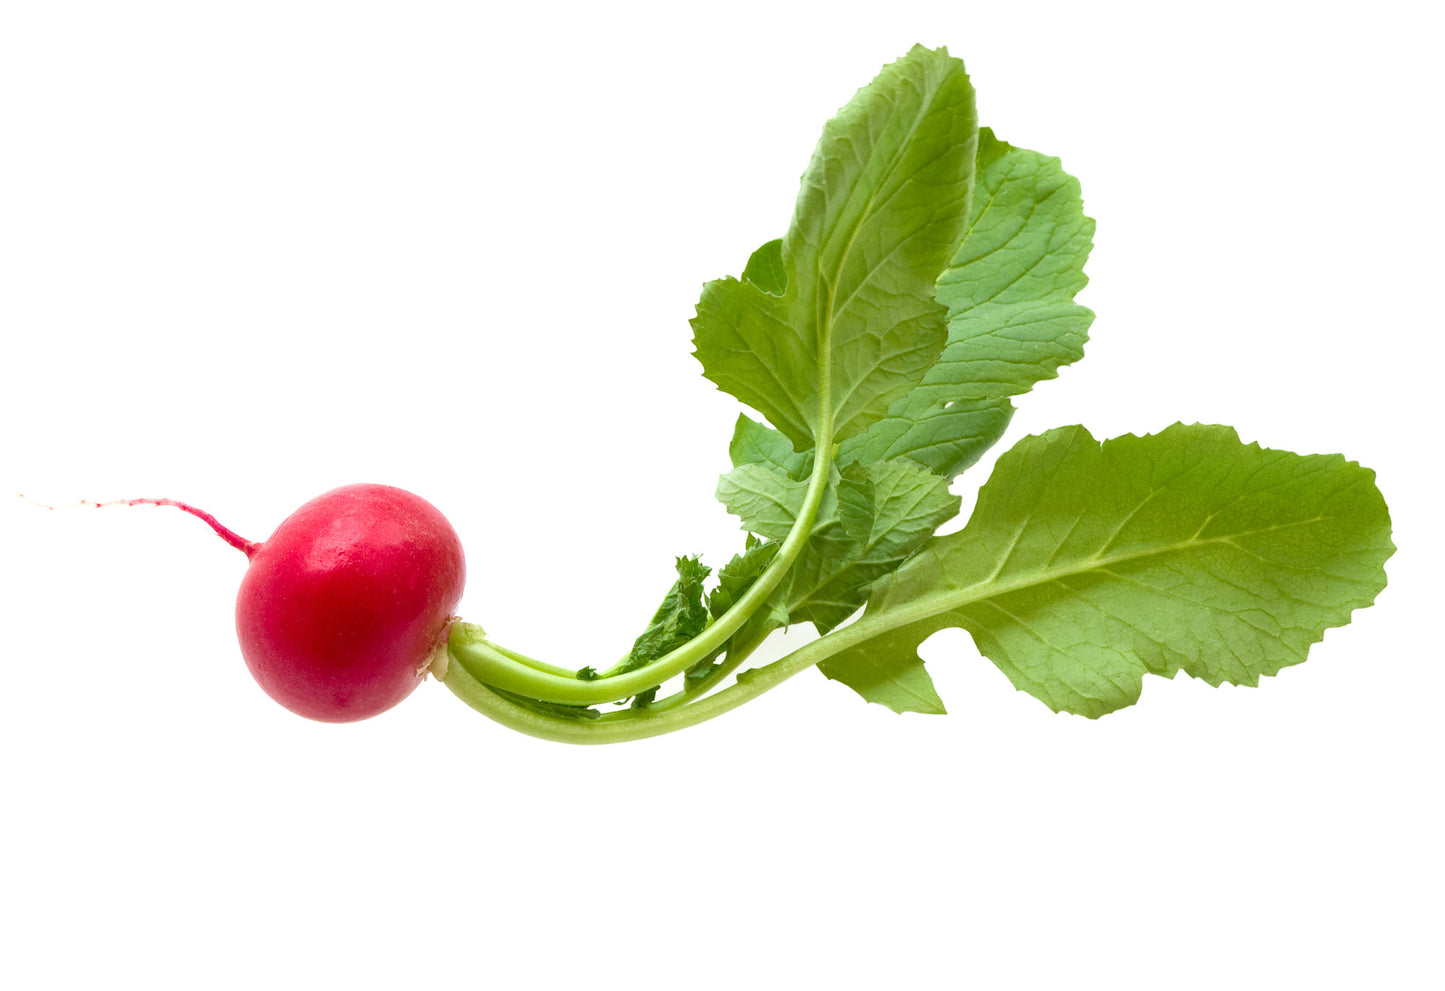 On display is a single radish, of the variety Crimson Giant. The radish appear to be freshly harvested, and fully washed. The radish is a bright magenta, with a fresh, crisp, green stalk culminating in hearty green leaves. The radish appears to be in free fall motion against a white background. 